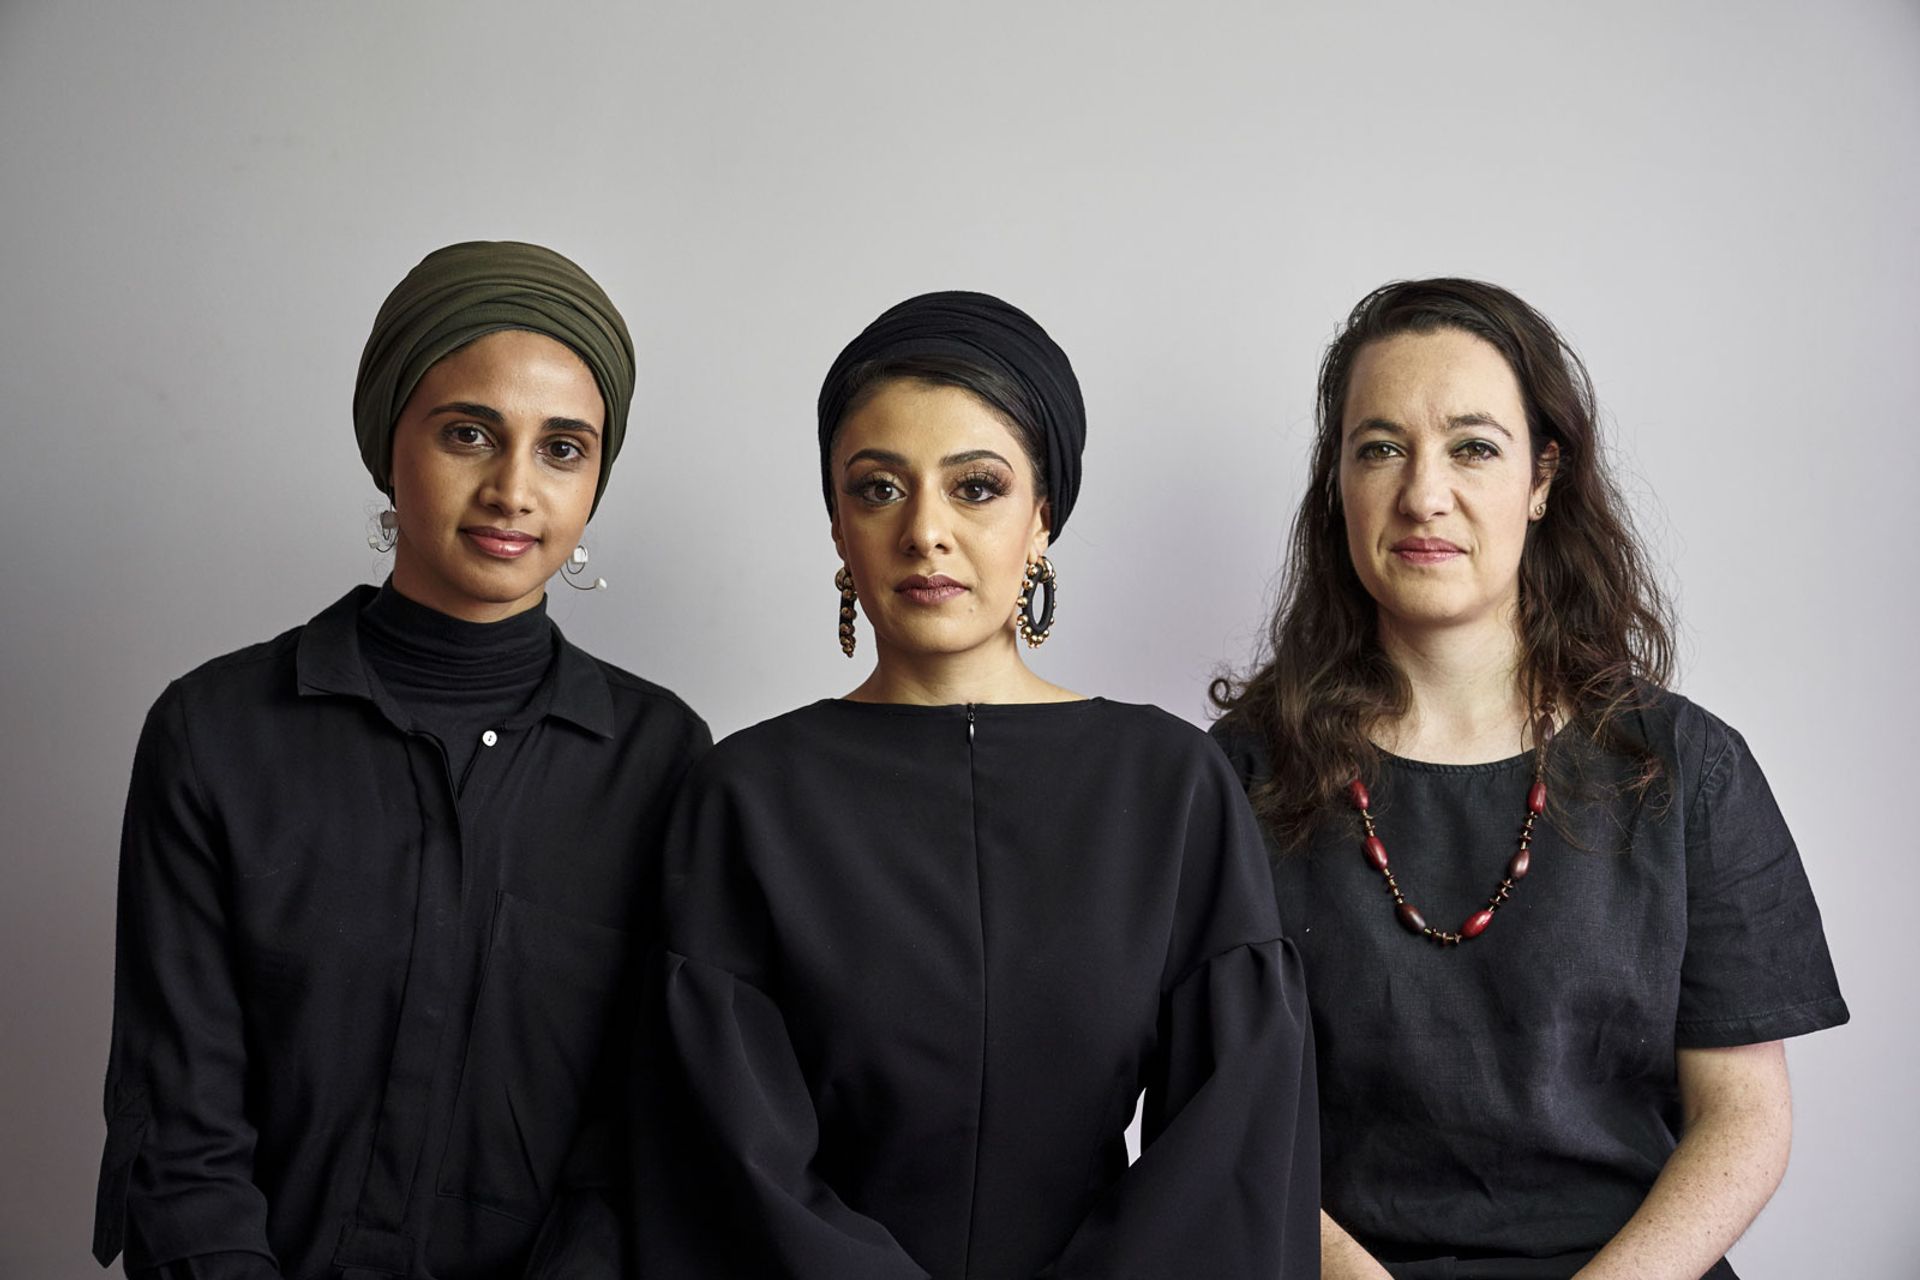 Architects Amina Kaskar, Sumayya Vally and Sarah de Villiers of Counterspace will design this year's Serpentine pavilion Photo: Justice Mukheli, © Counterspace